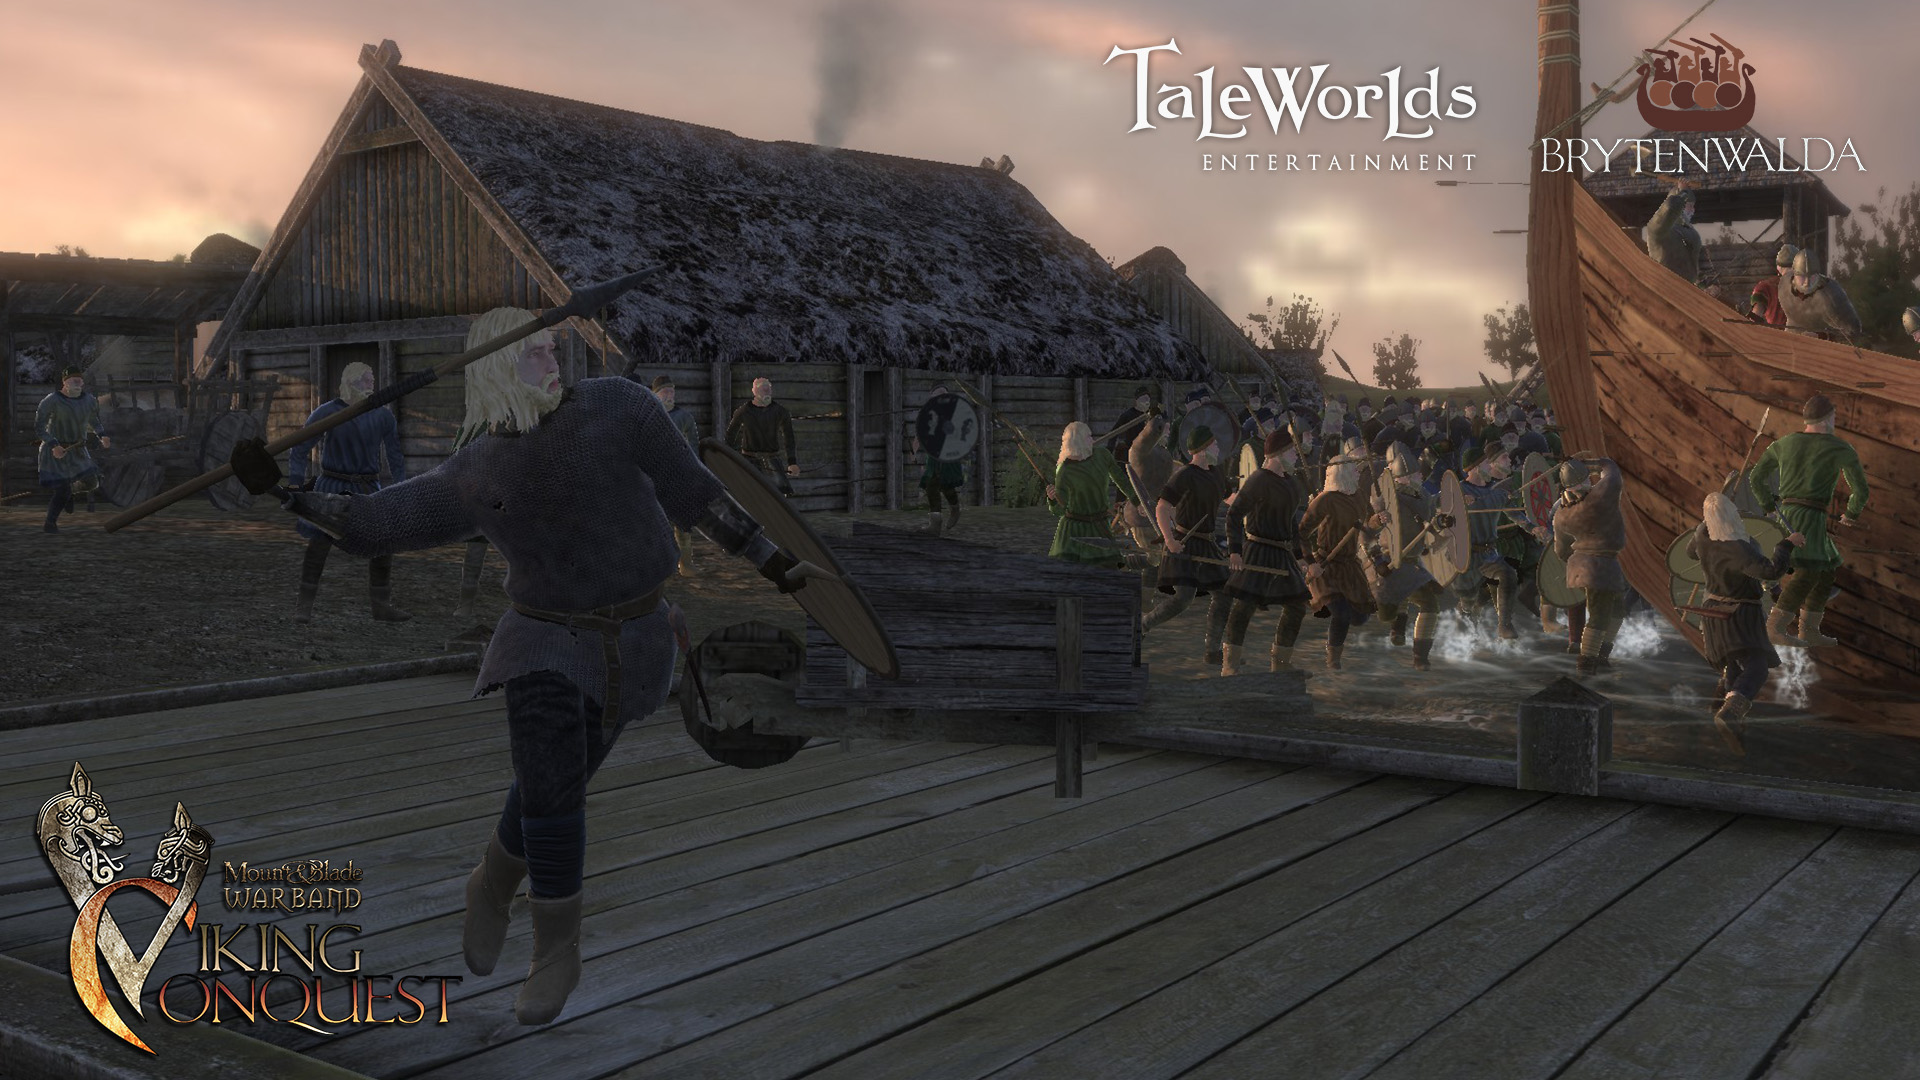 how to get mount and blade warband serial key